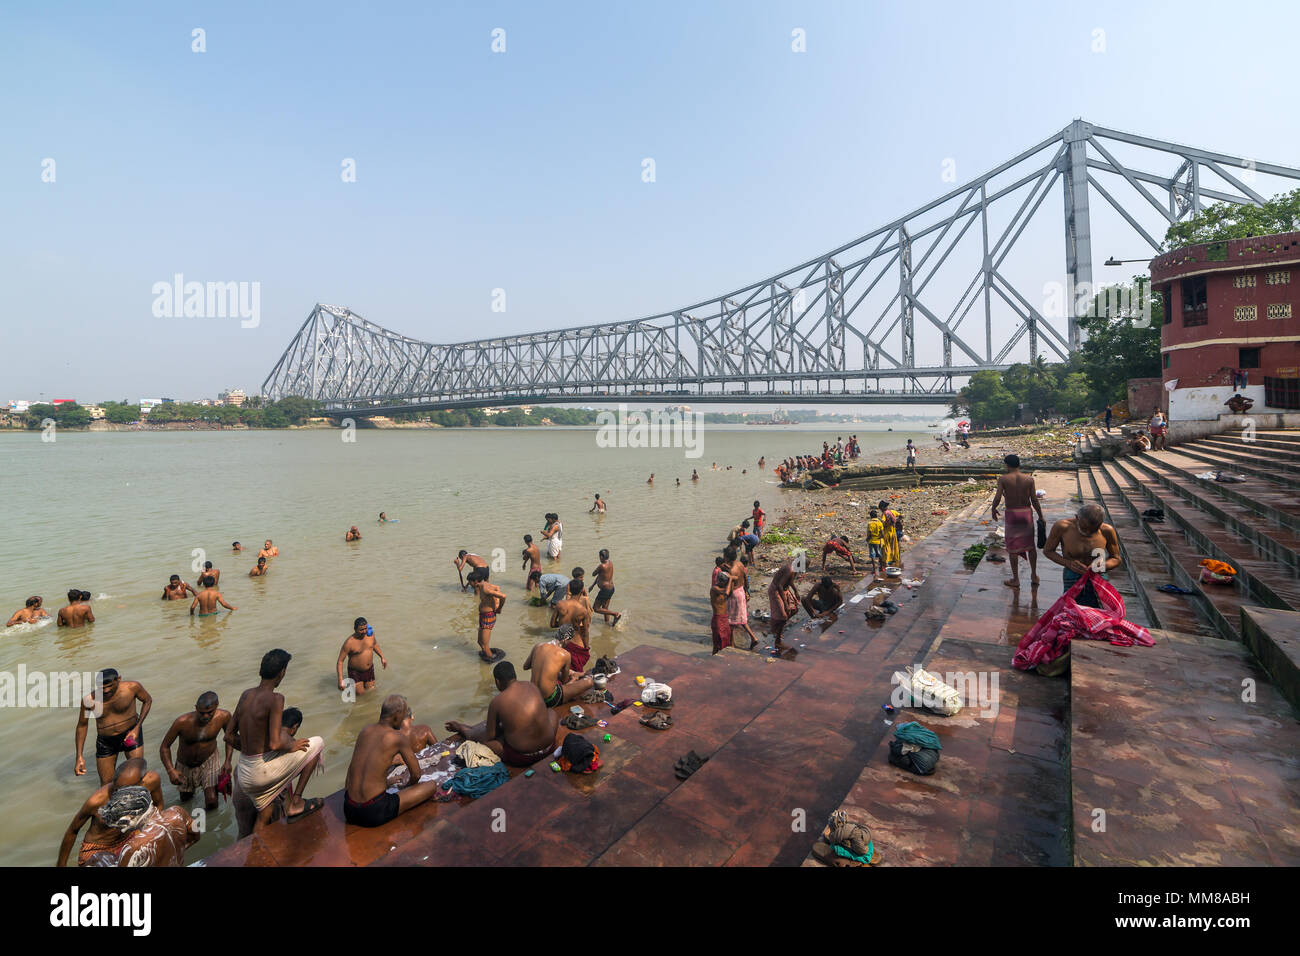 Kolkata, India - April 12, 2017: Unidentified indian people taking bath in Hooghly river with a Howrah bridge on background in Calcutta, West Bengal,  Stock Photo